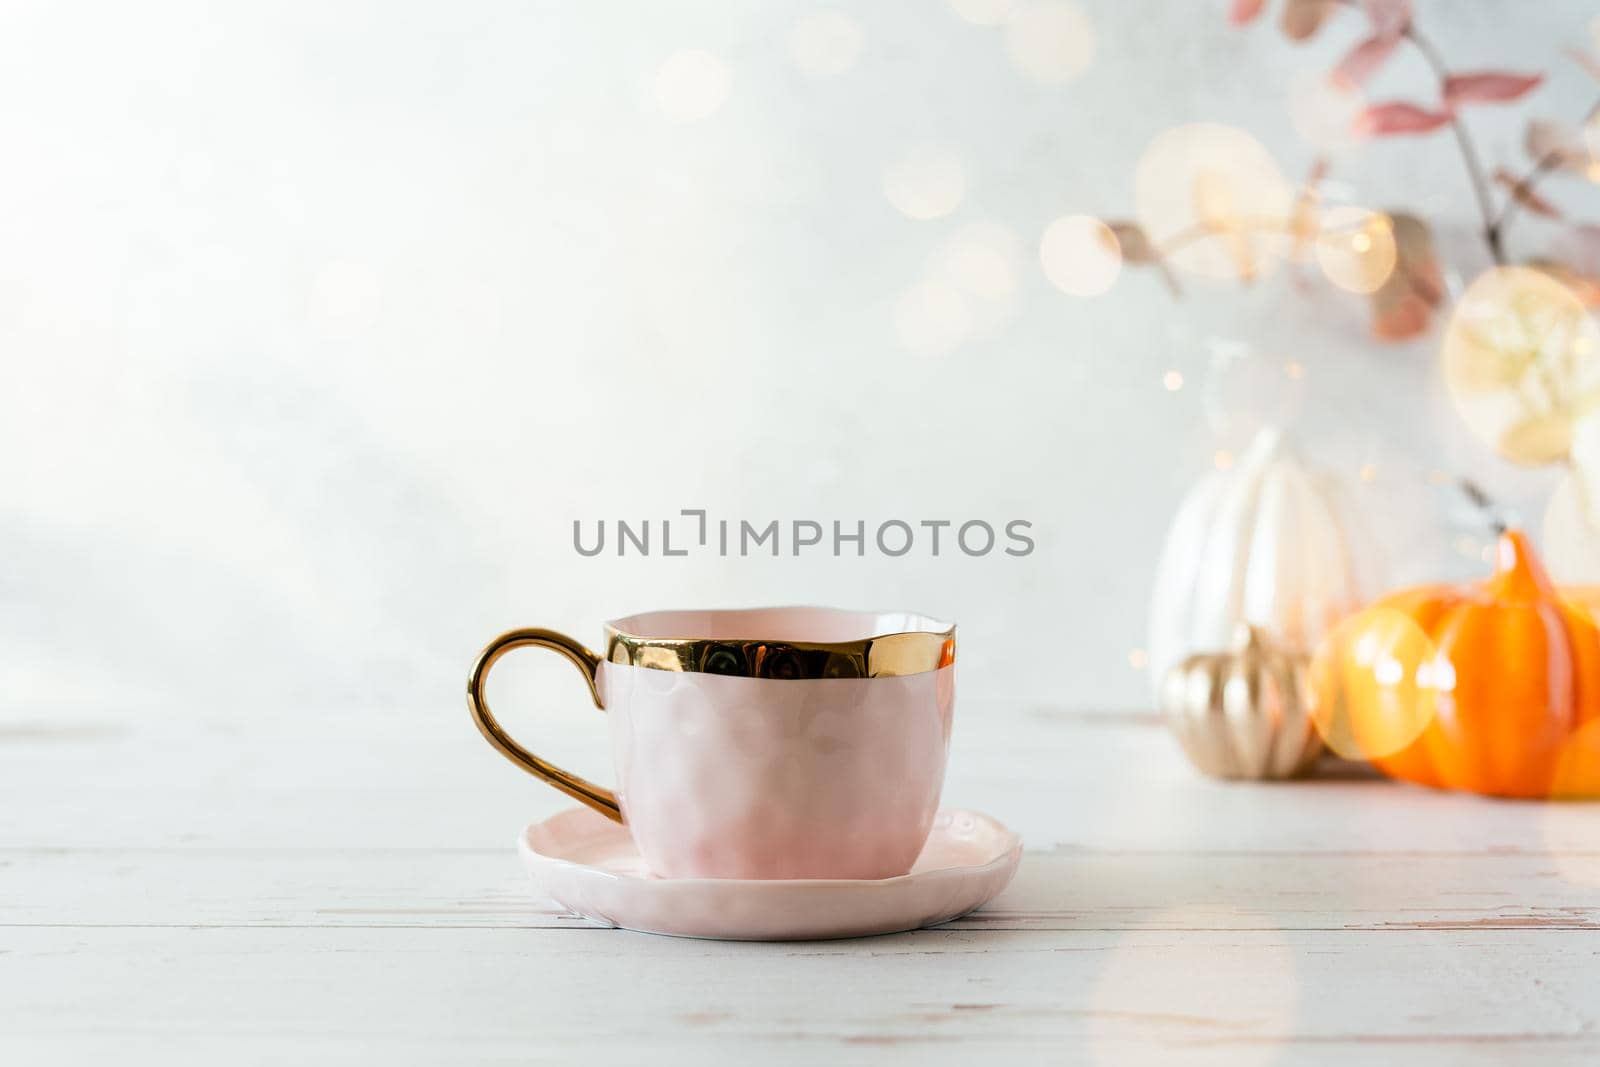 Details of Still life, cup of tea or coffee, pumpkins, candle, brunch with leaves on white table background, home decor in a cozy house. Autumn weekend concept. Fallen leaves and home decoration